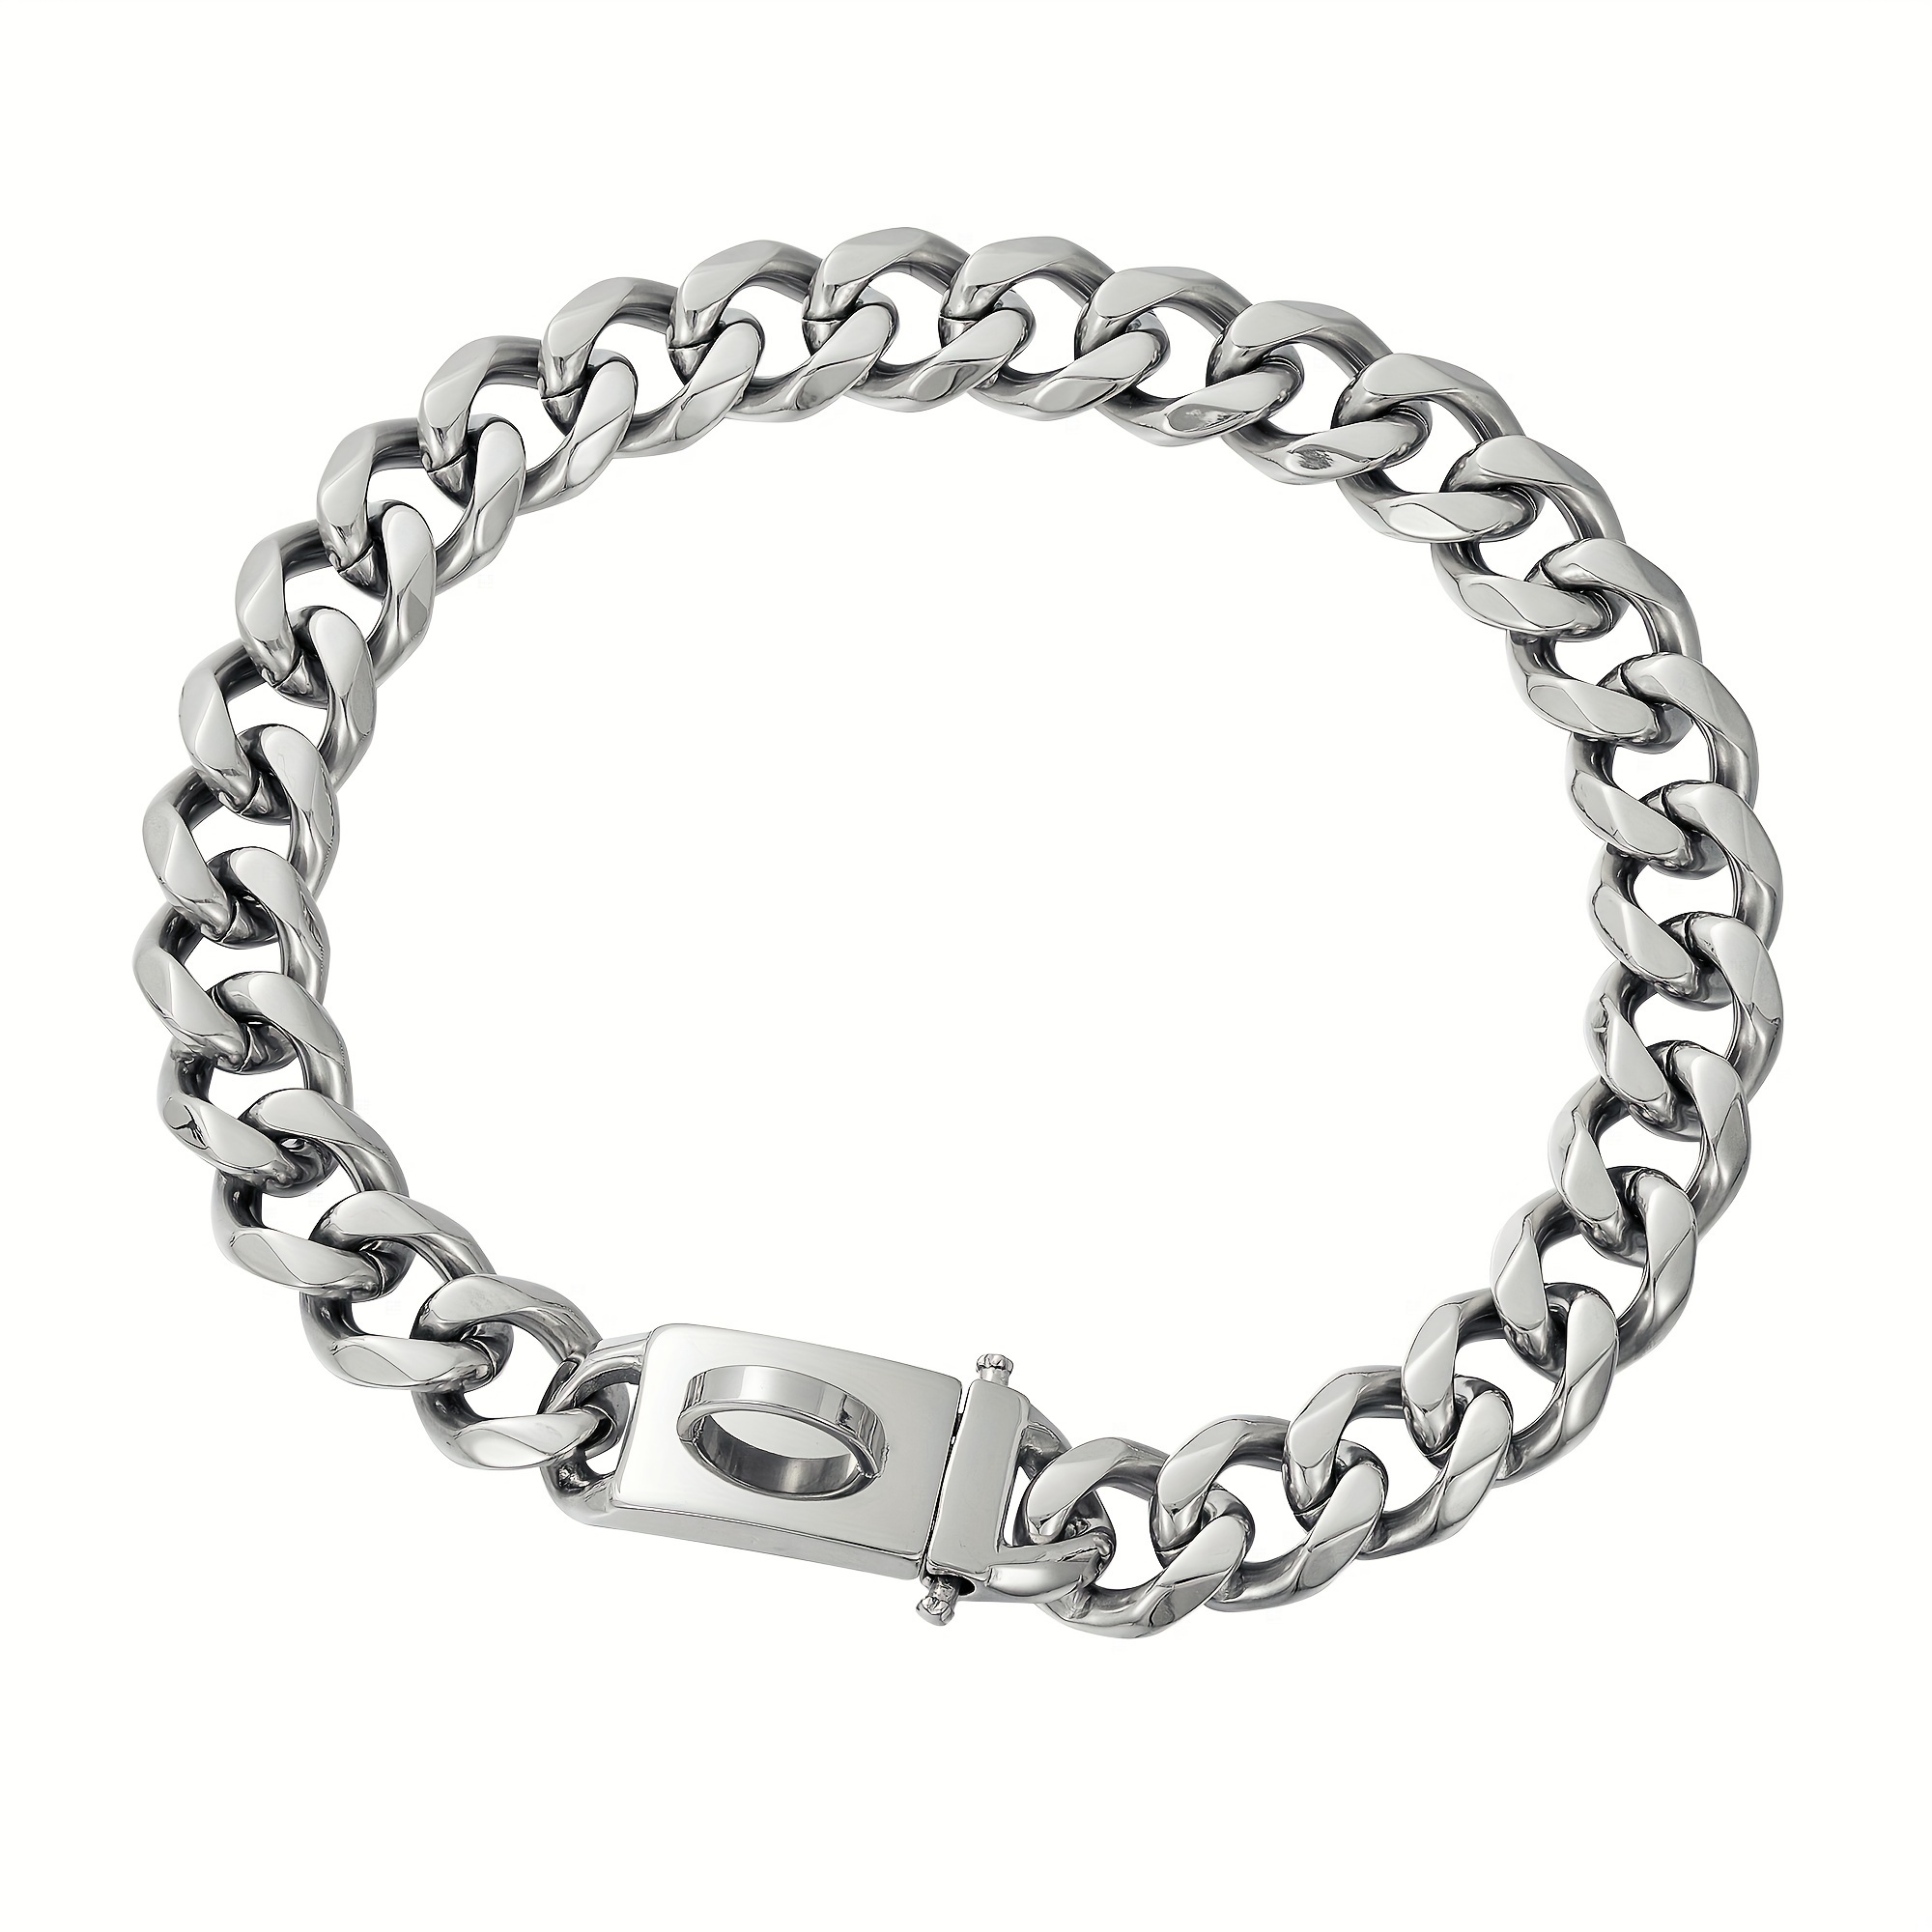 

Stainless Steel Dog Chain Collar, Silver Color, Heavy-duty For Large Dogs, Various Lengths (10-24 Inches), 15mm Width